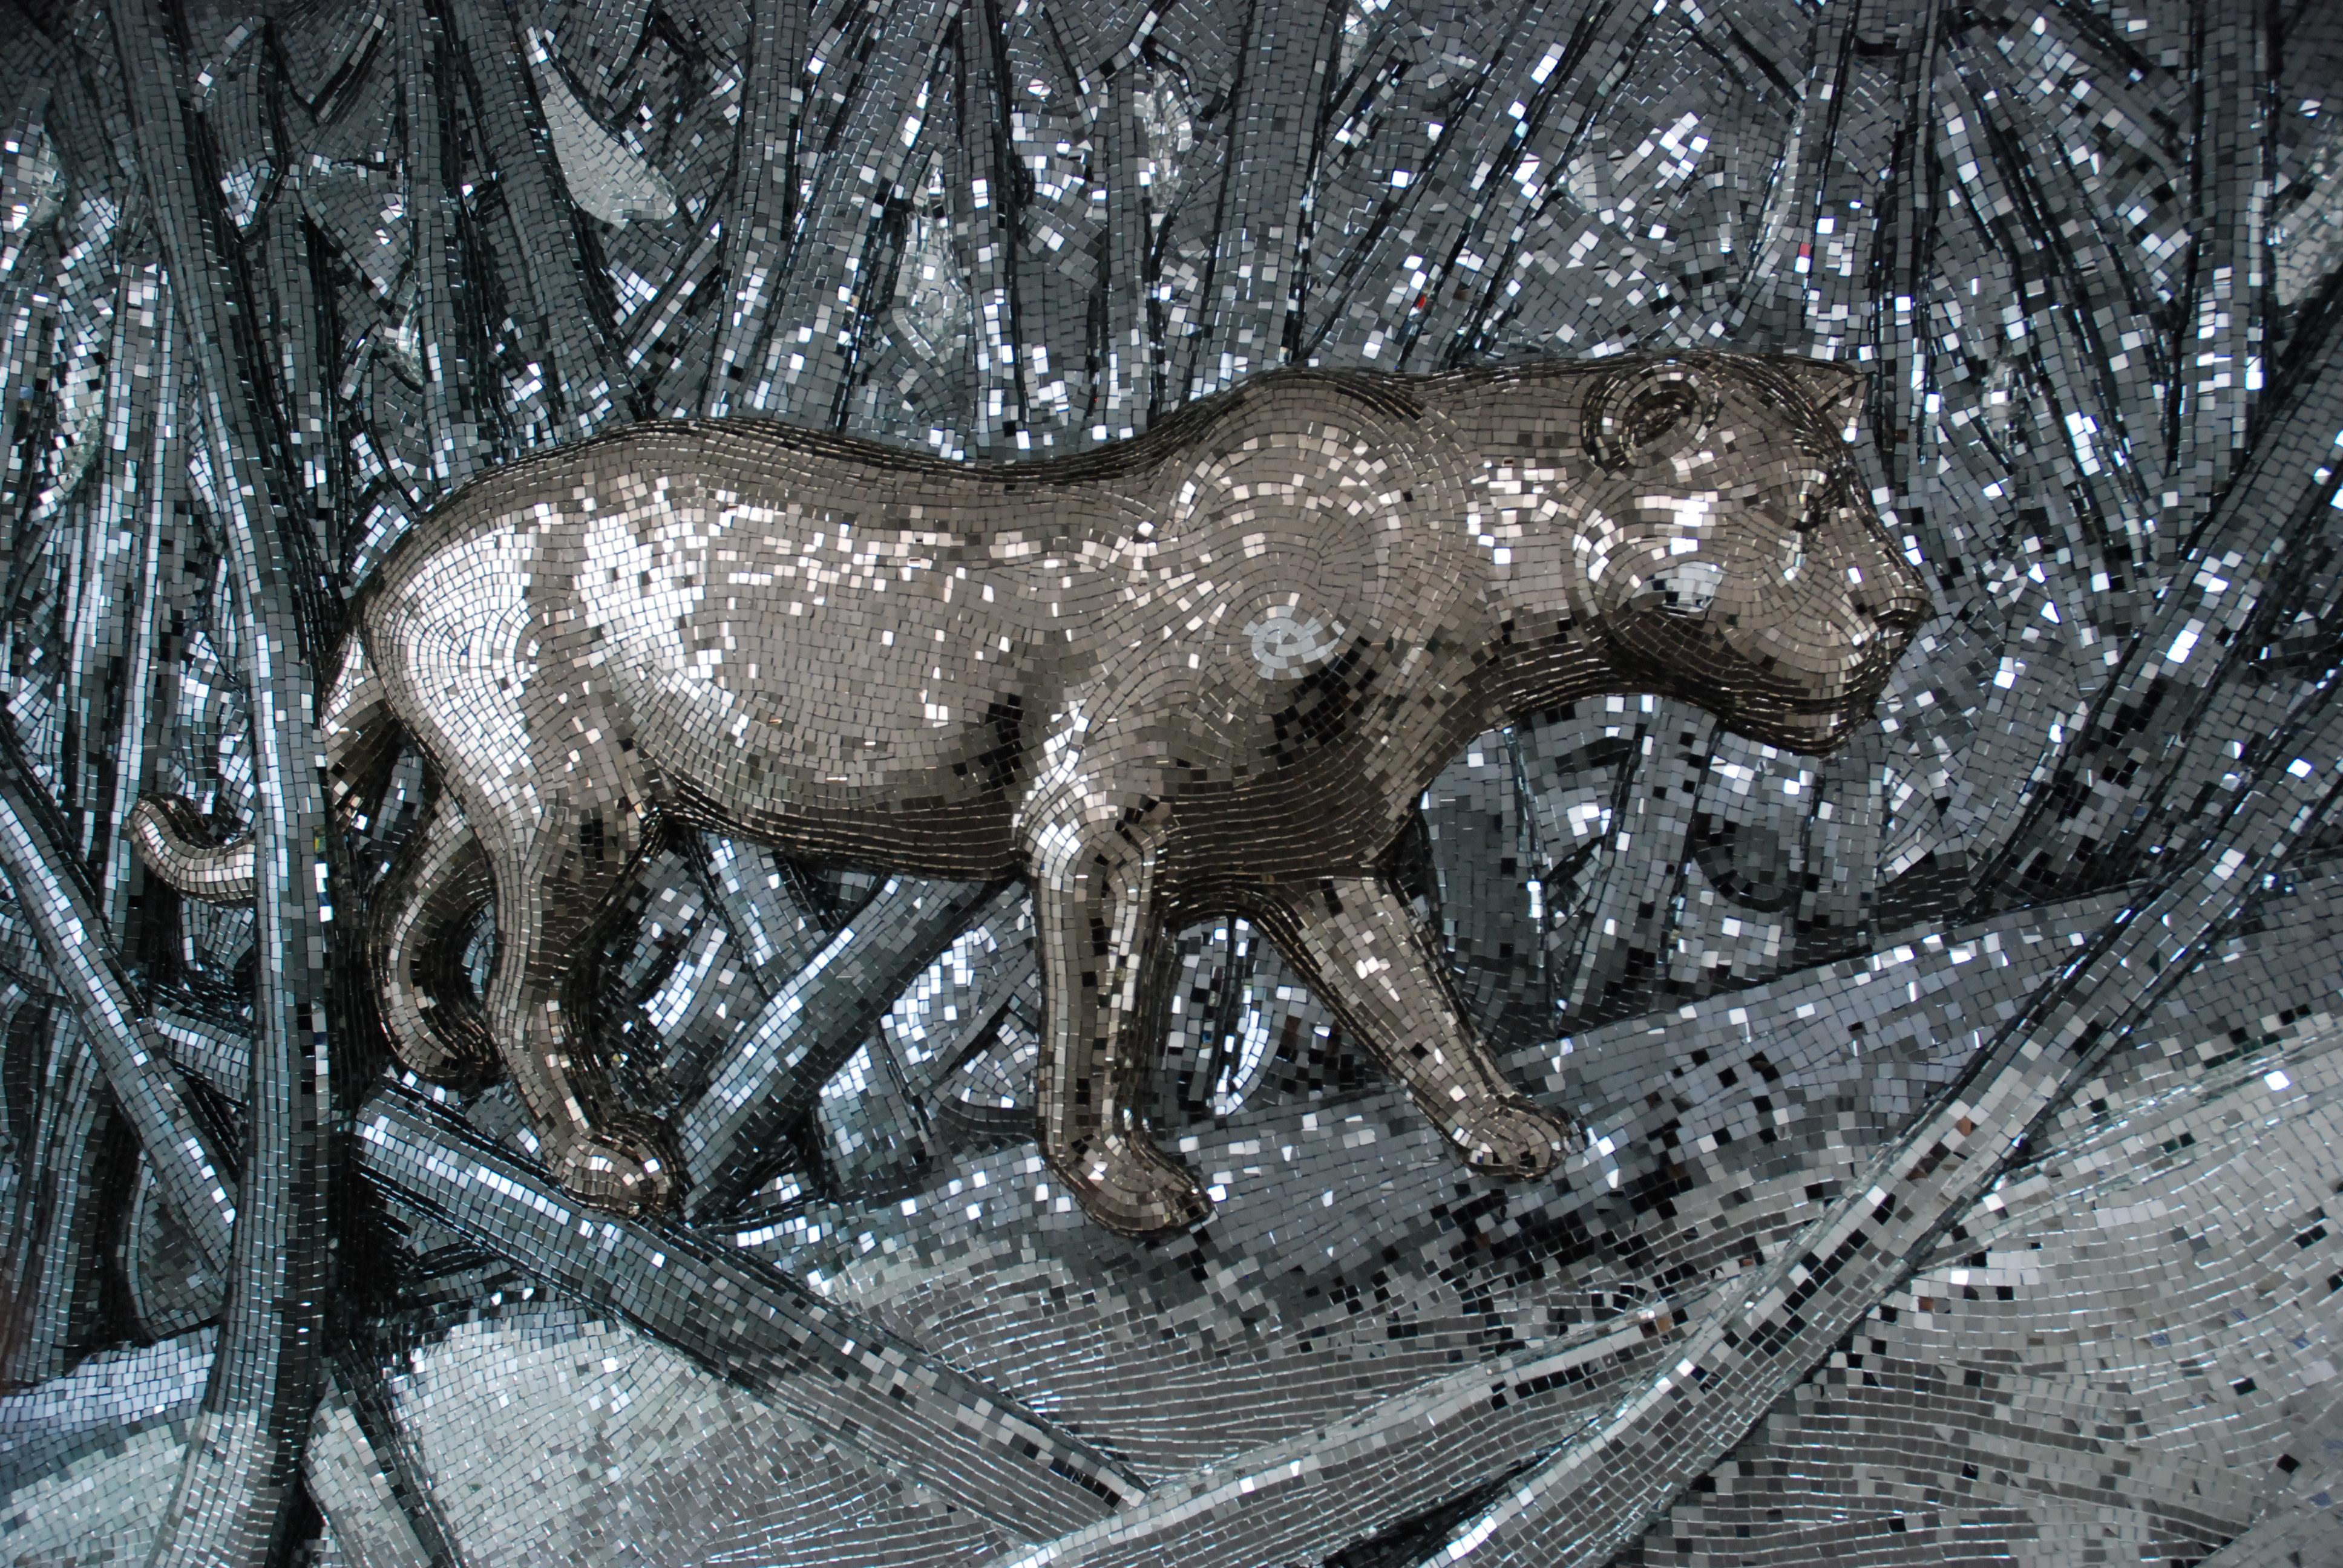 Lioness In The Forest by Davide Medri
Dimensions: W 300 x D 20 x H 200 cm (dimensions may vary)
Materials: Mirror Mosaic

Davide Medri was born in Cesena on August 7th 1967 and graduated at the Academy of Fine Arts in Ravenna, the Gino Severini